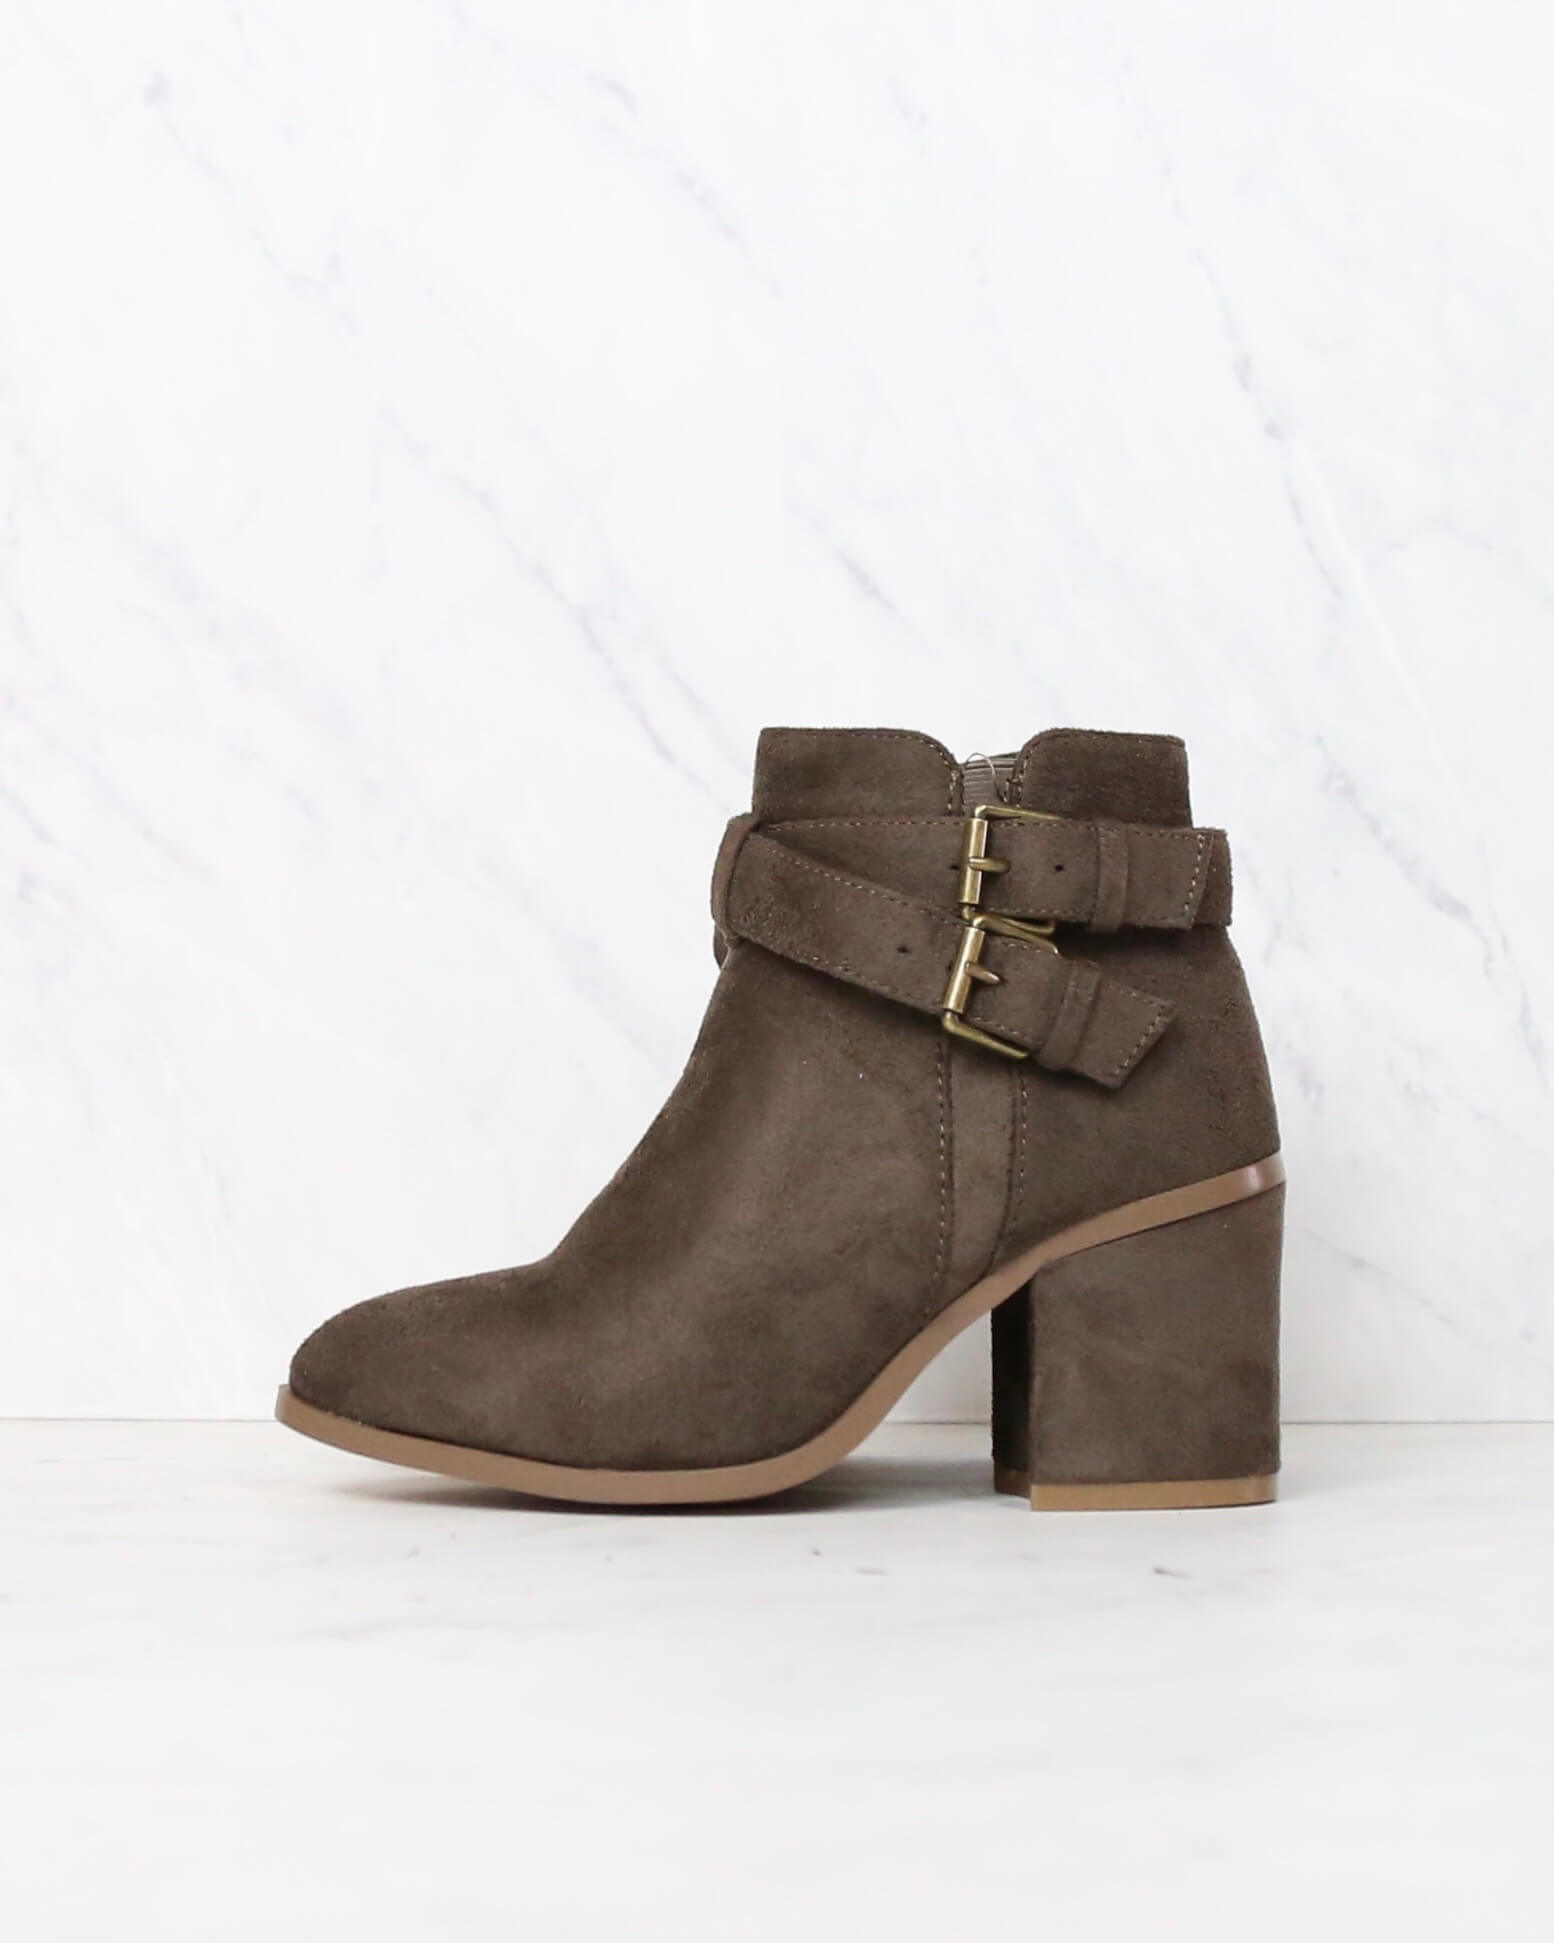 A Grand Entrance Faux Suede Ankle Bootie With Buckle Detail in More Co ...